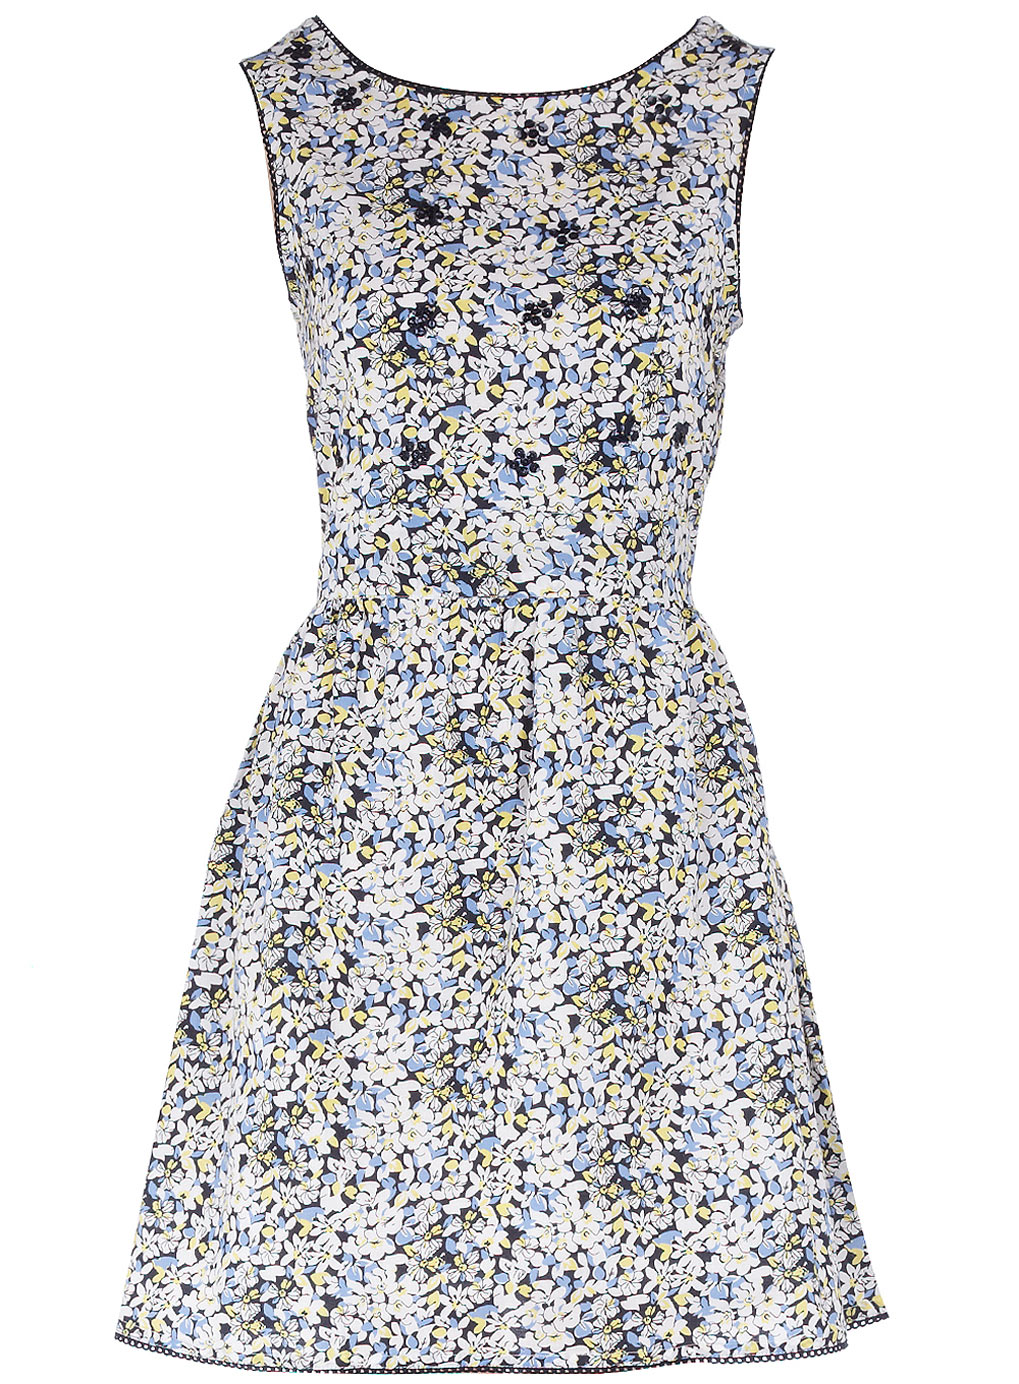 All About the High Street: £10 off dresses at Dorothy Perkins!